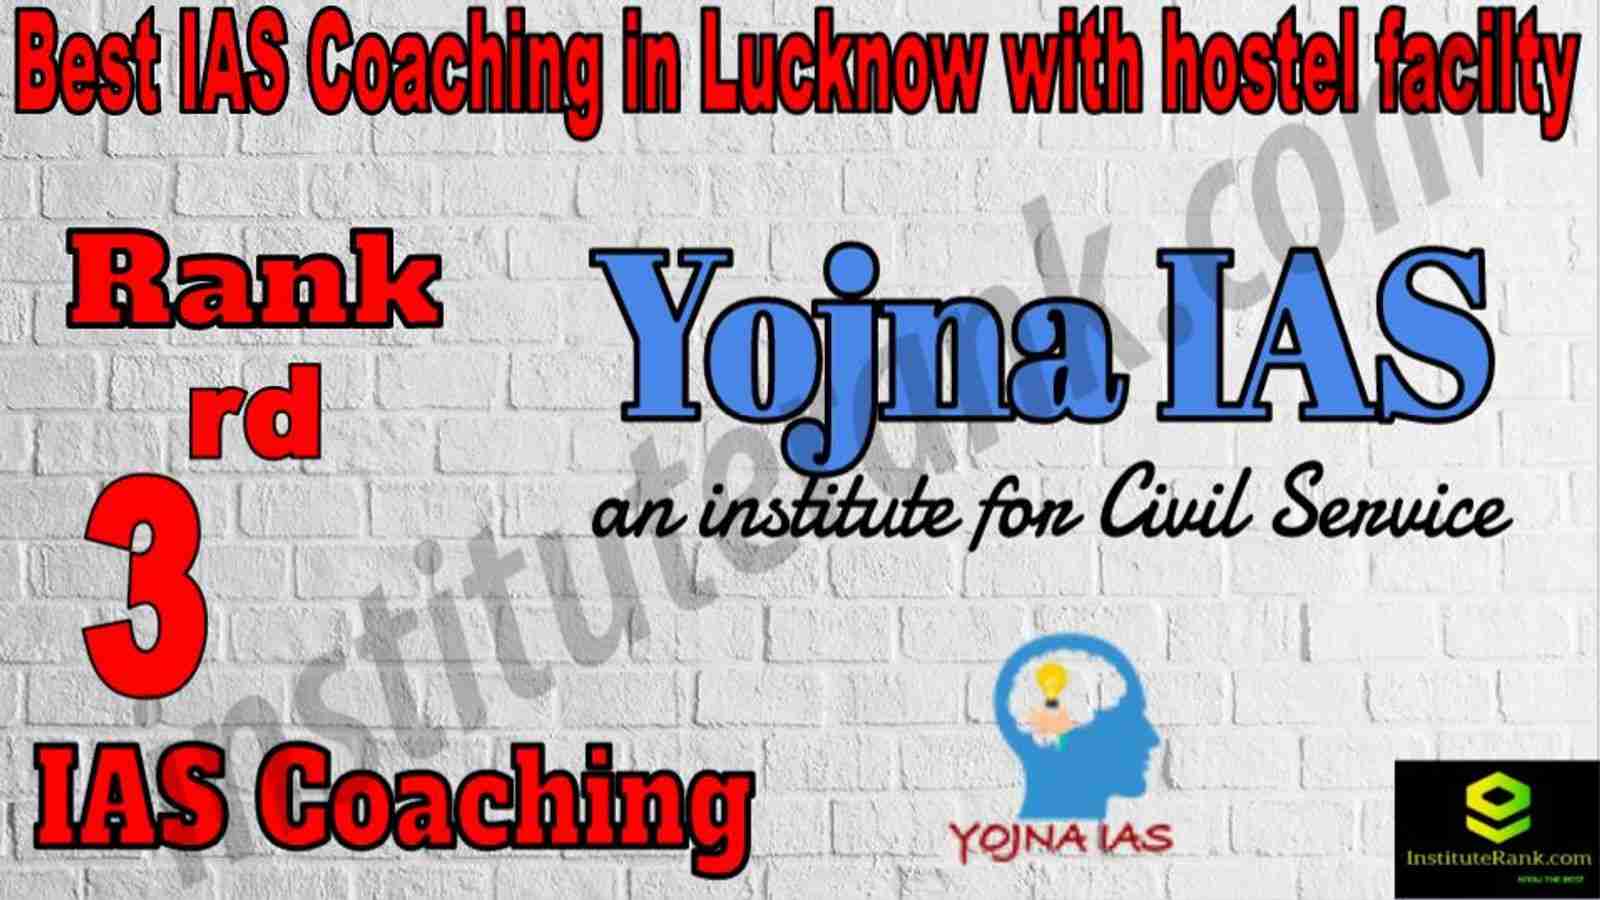 3rd Best IAS Coaching in Lucknow With Hostel facility